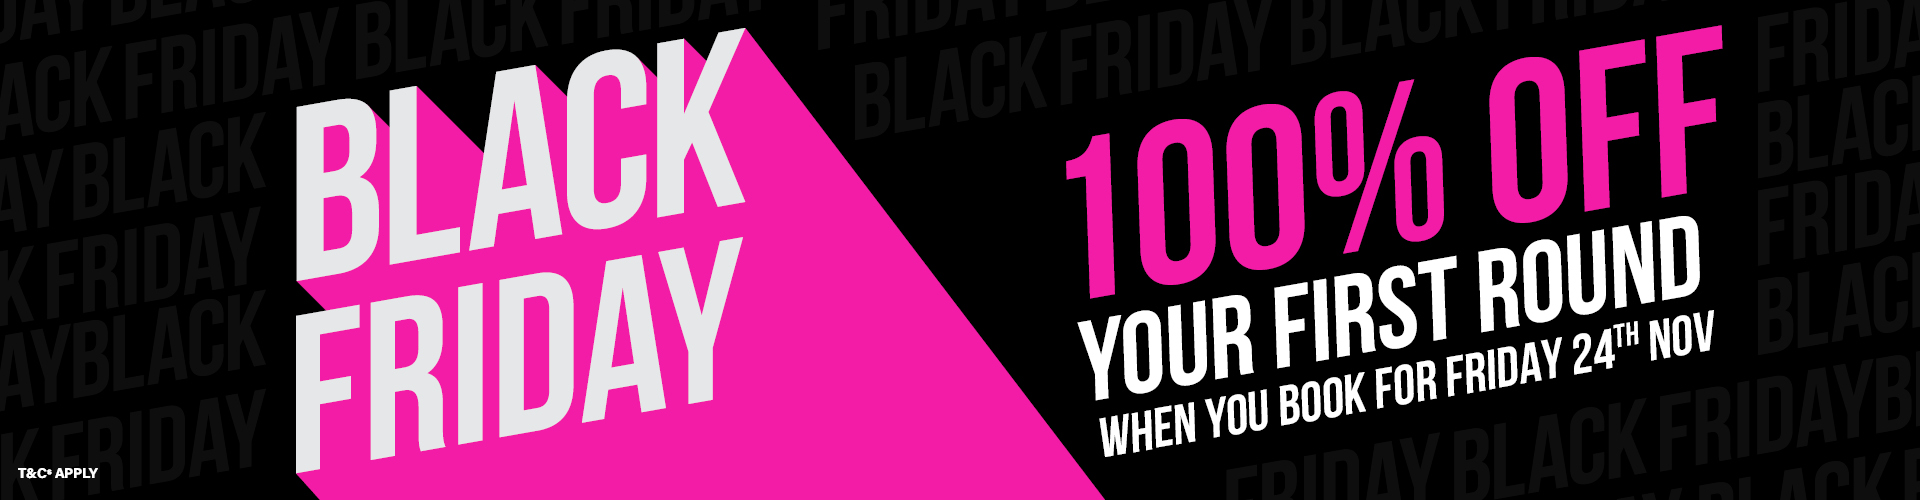 Black Friday - 100% Off Your First Round When You Book For 24th Nov